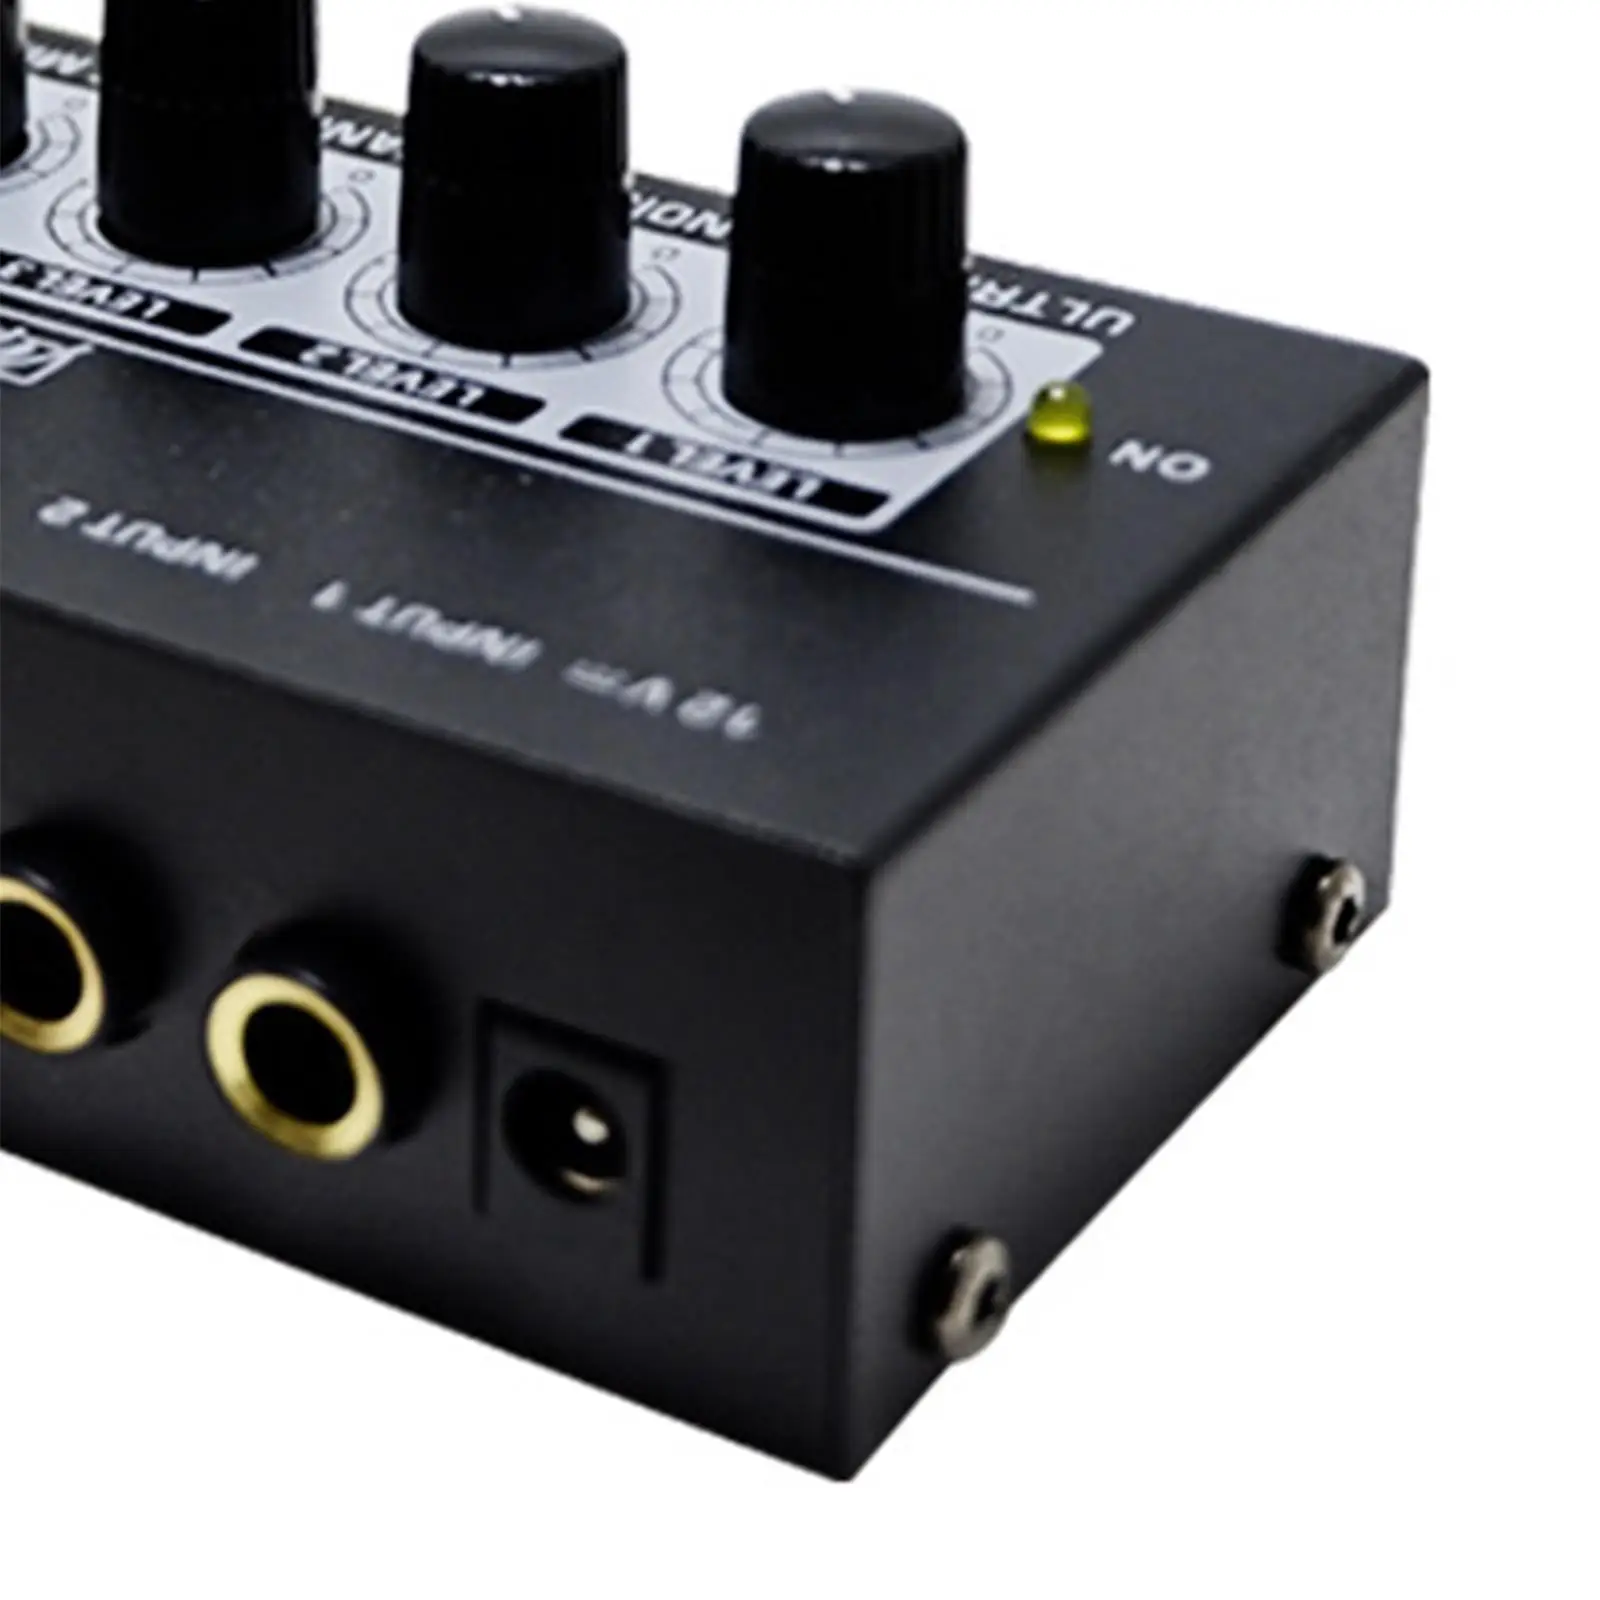 Mini Audio Mixer 12V Portable Mixer for Computer Guitars Bass Keyboards Mixer Studio Stage Mixing Instrument Small Clubs or Bars